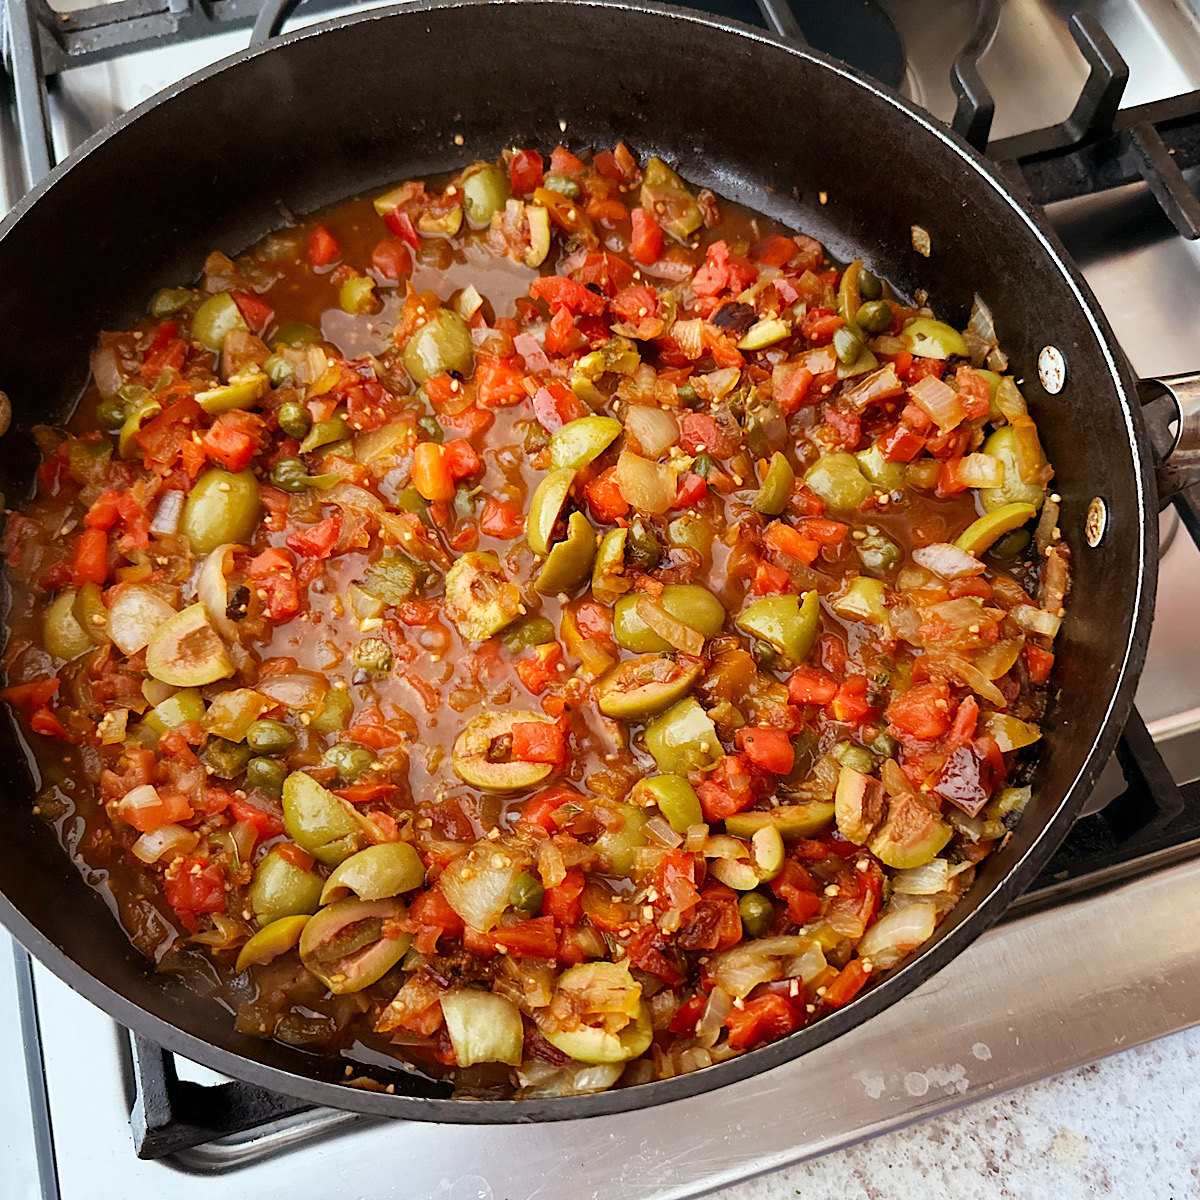 Skillet with tomatoes, olives, capers and onions simmering for fish veracruz.